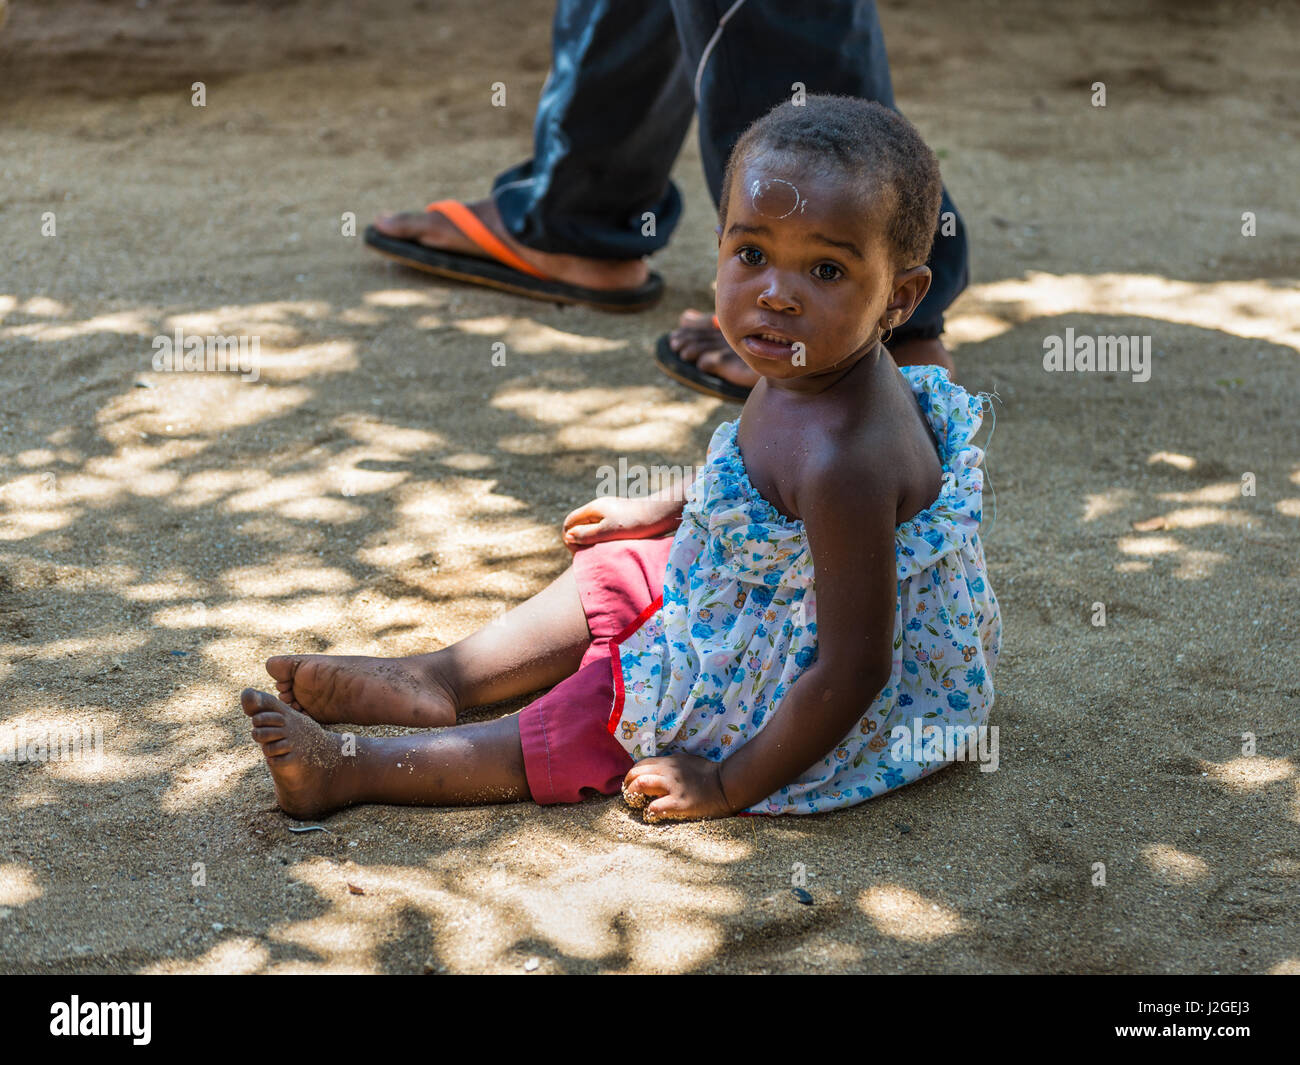 Ampasipohy, Nosy Be, Madagascar - December 19, 2015: Portrait of an unidentified Madagascar child. People in Madagascar suffer of poverty due to slow  Stock Photo